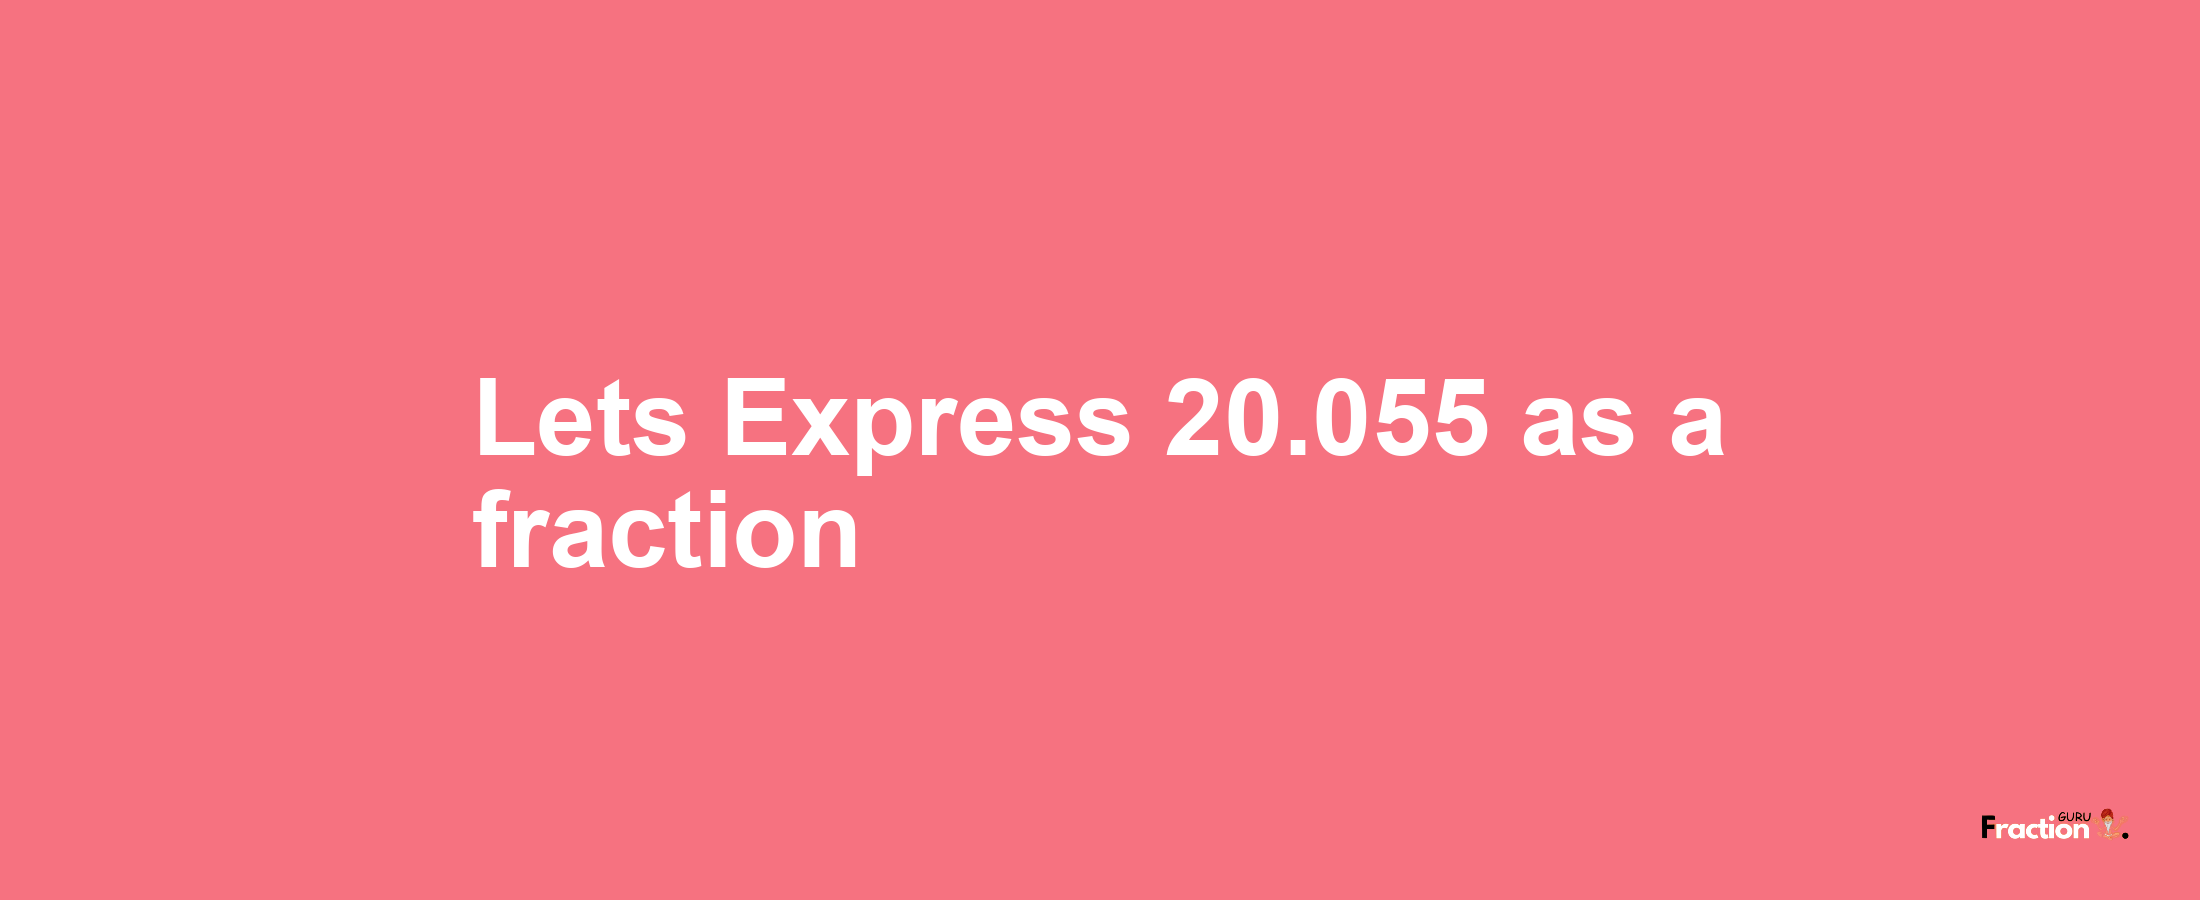 Lets Express 20.055 as afraction